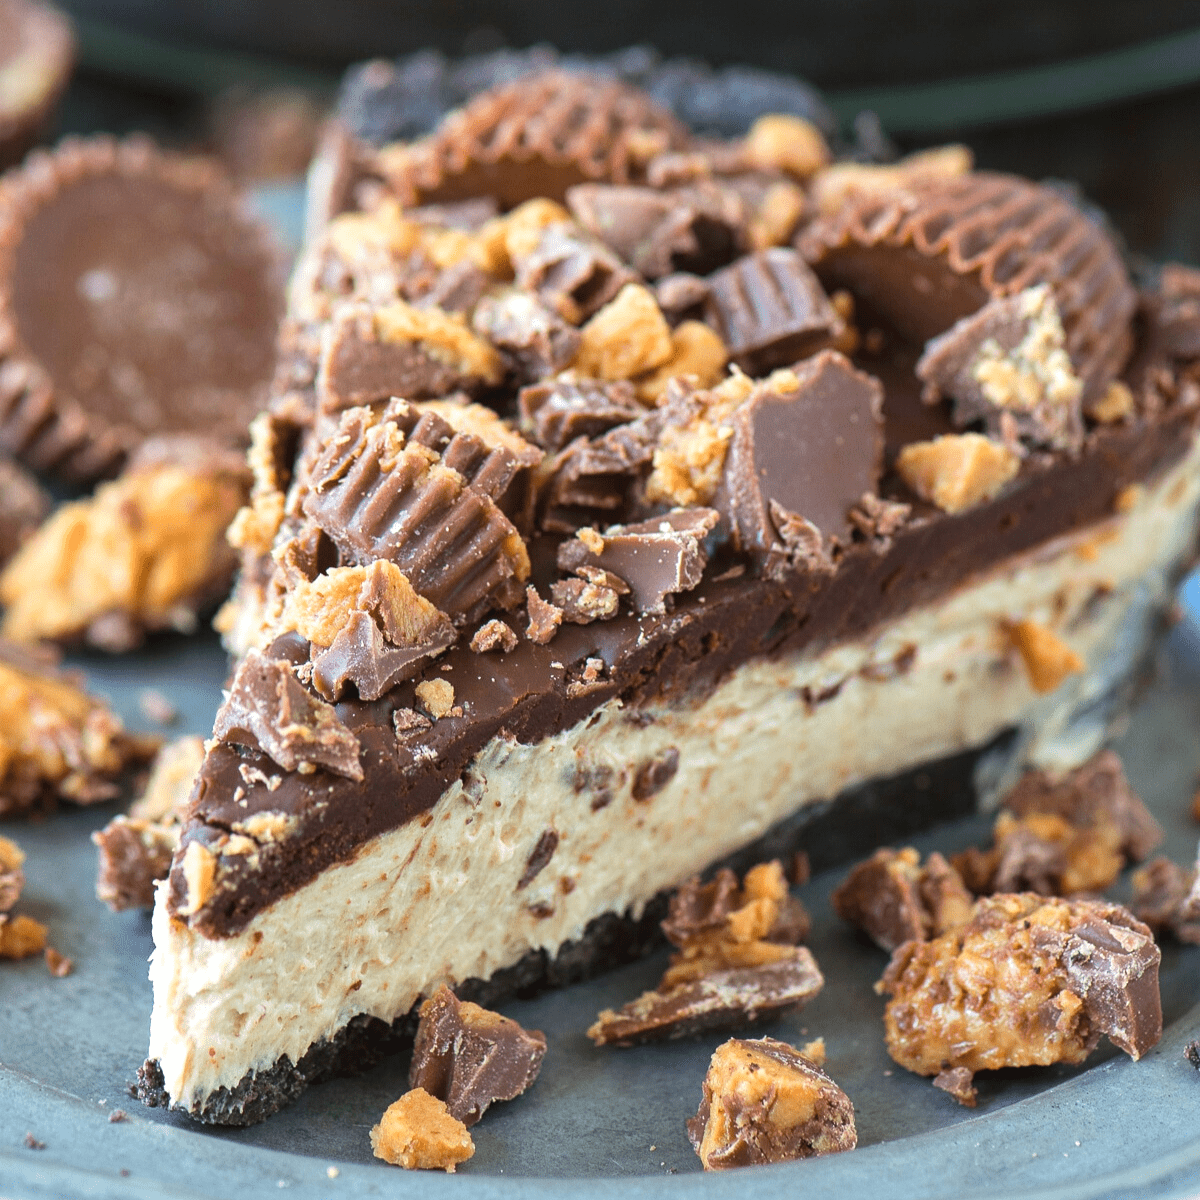 https://thefirstyearblog.com/wp-content/uploads/2020/05/reese-peanut-butter-cups-pie-recipe-square-2022.png